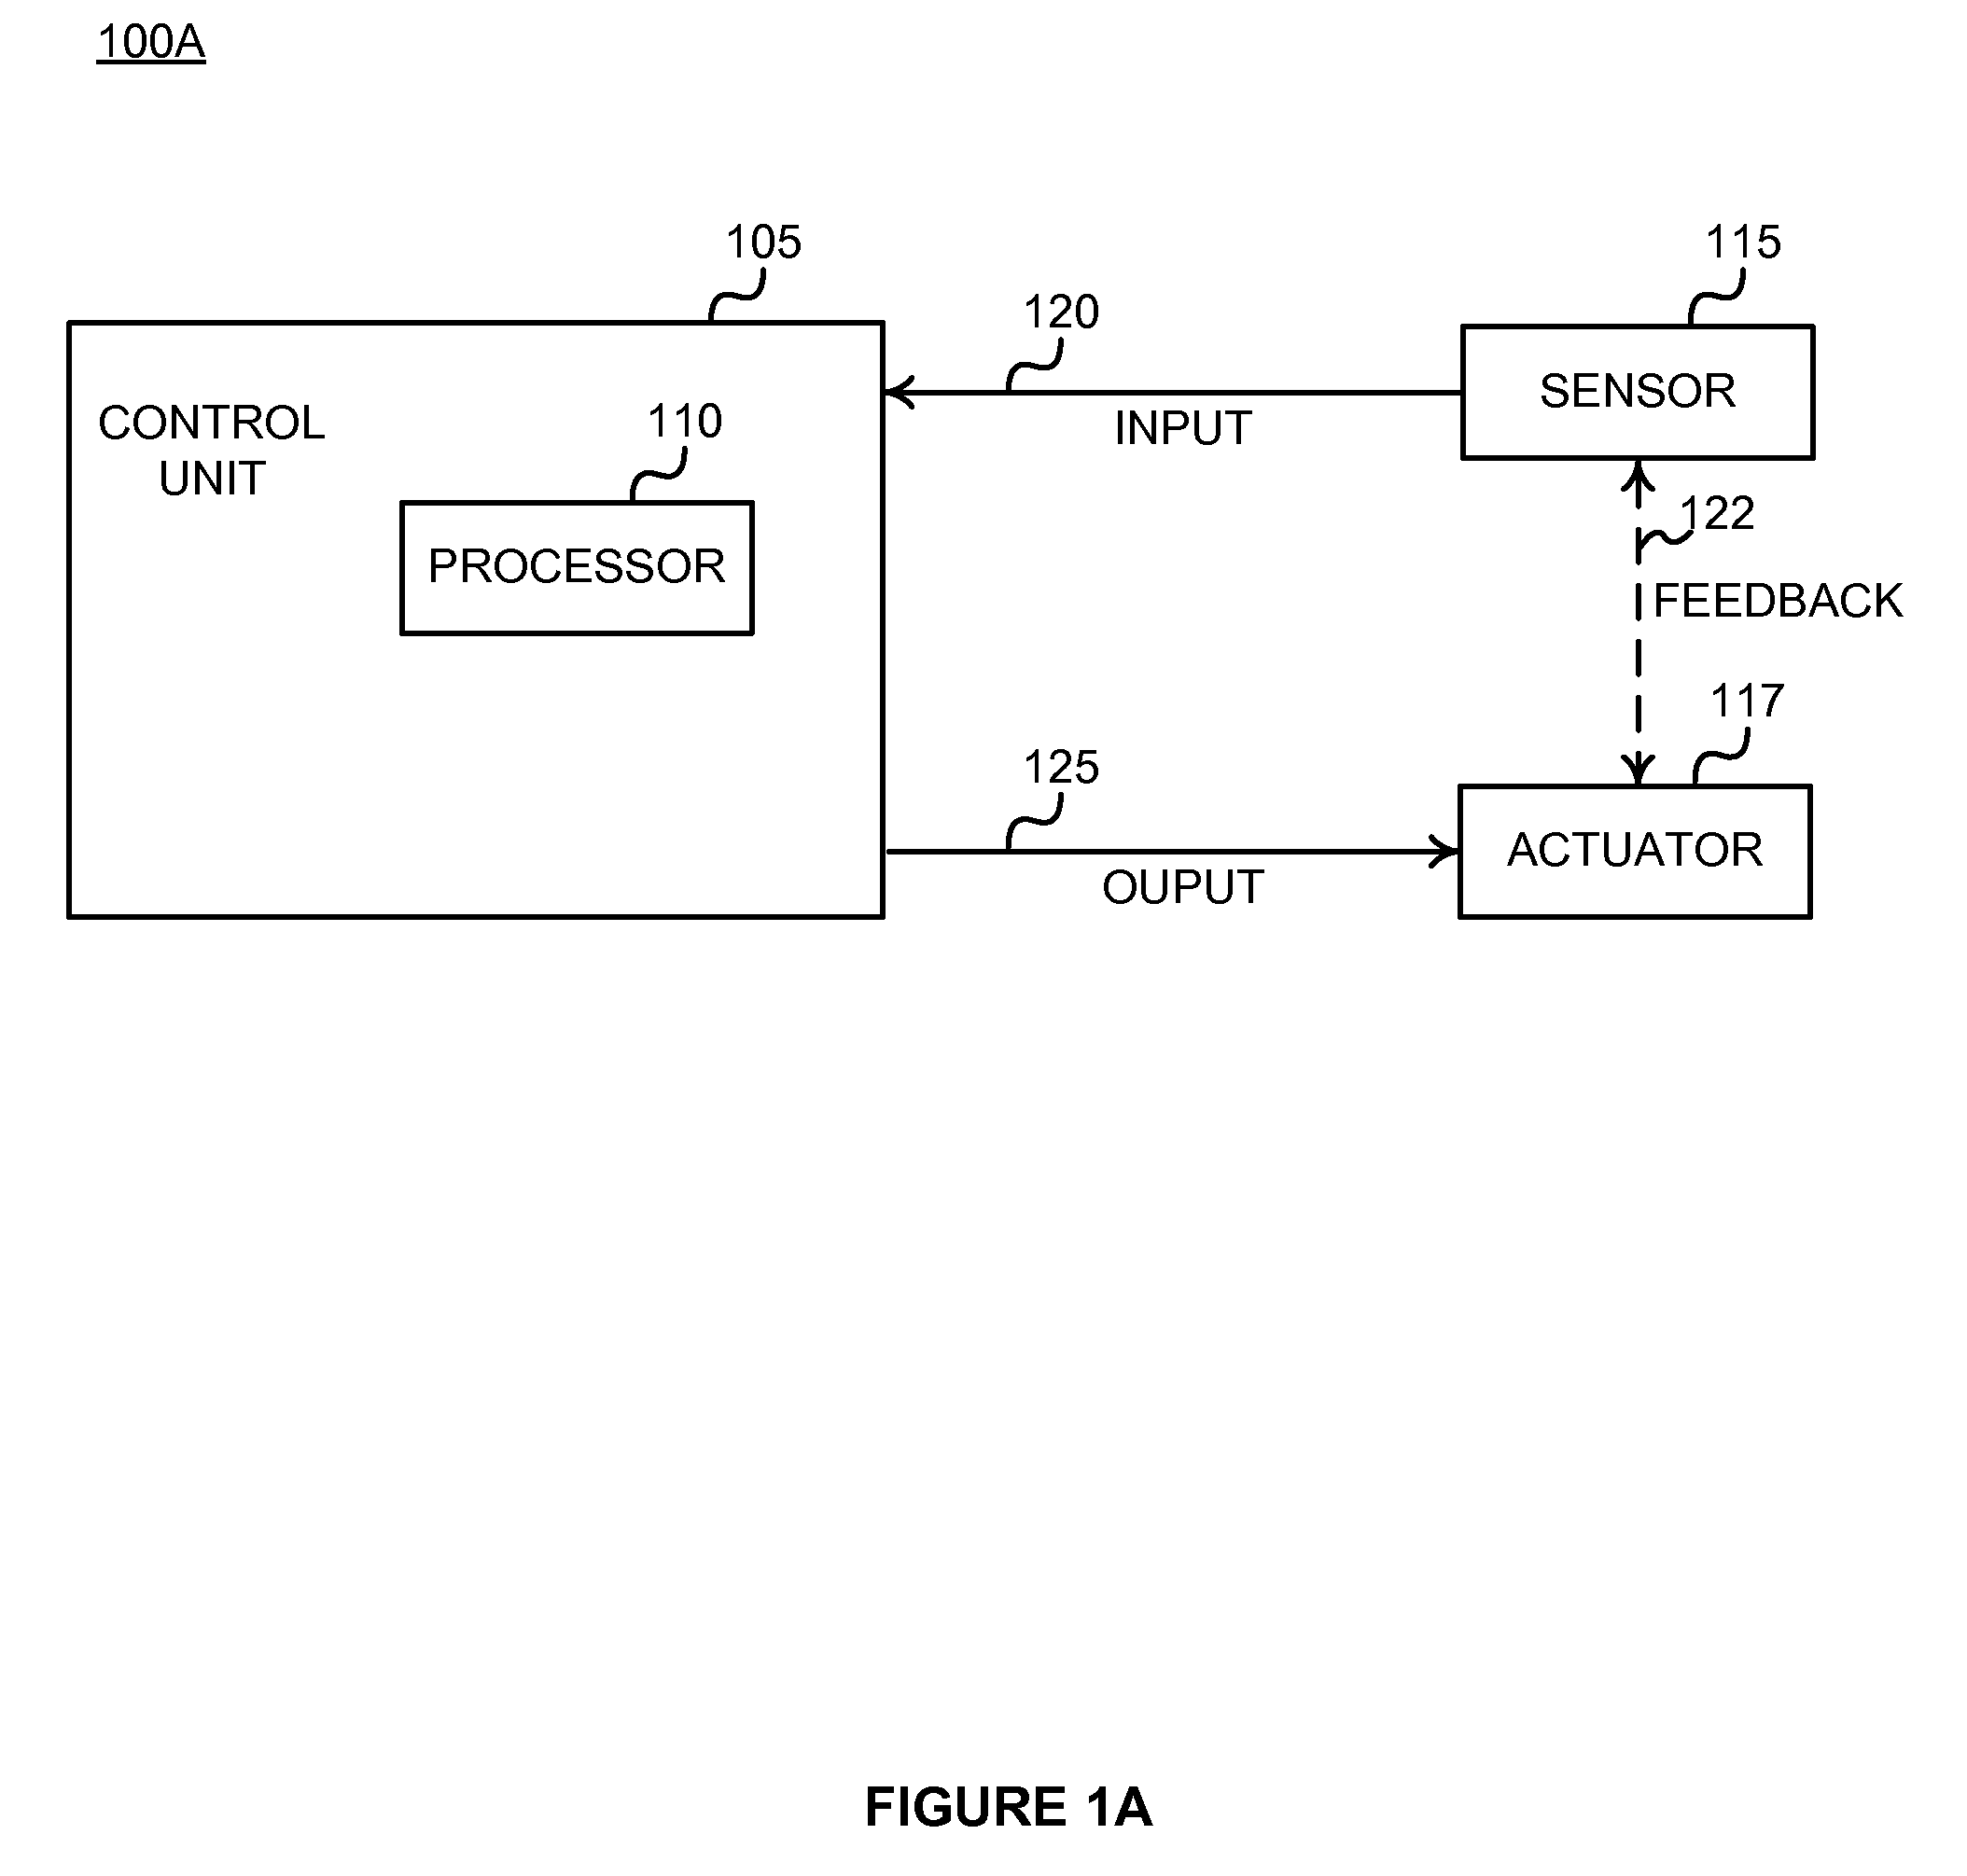 Architecture for a self-healing computer system